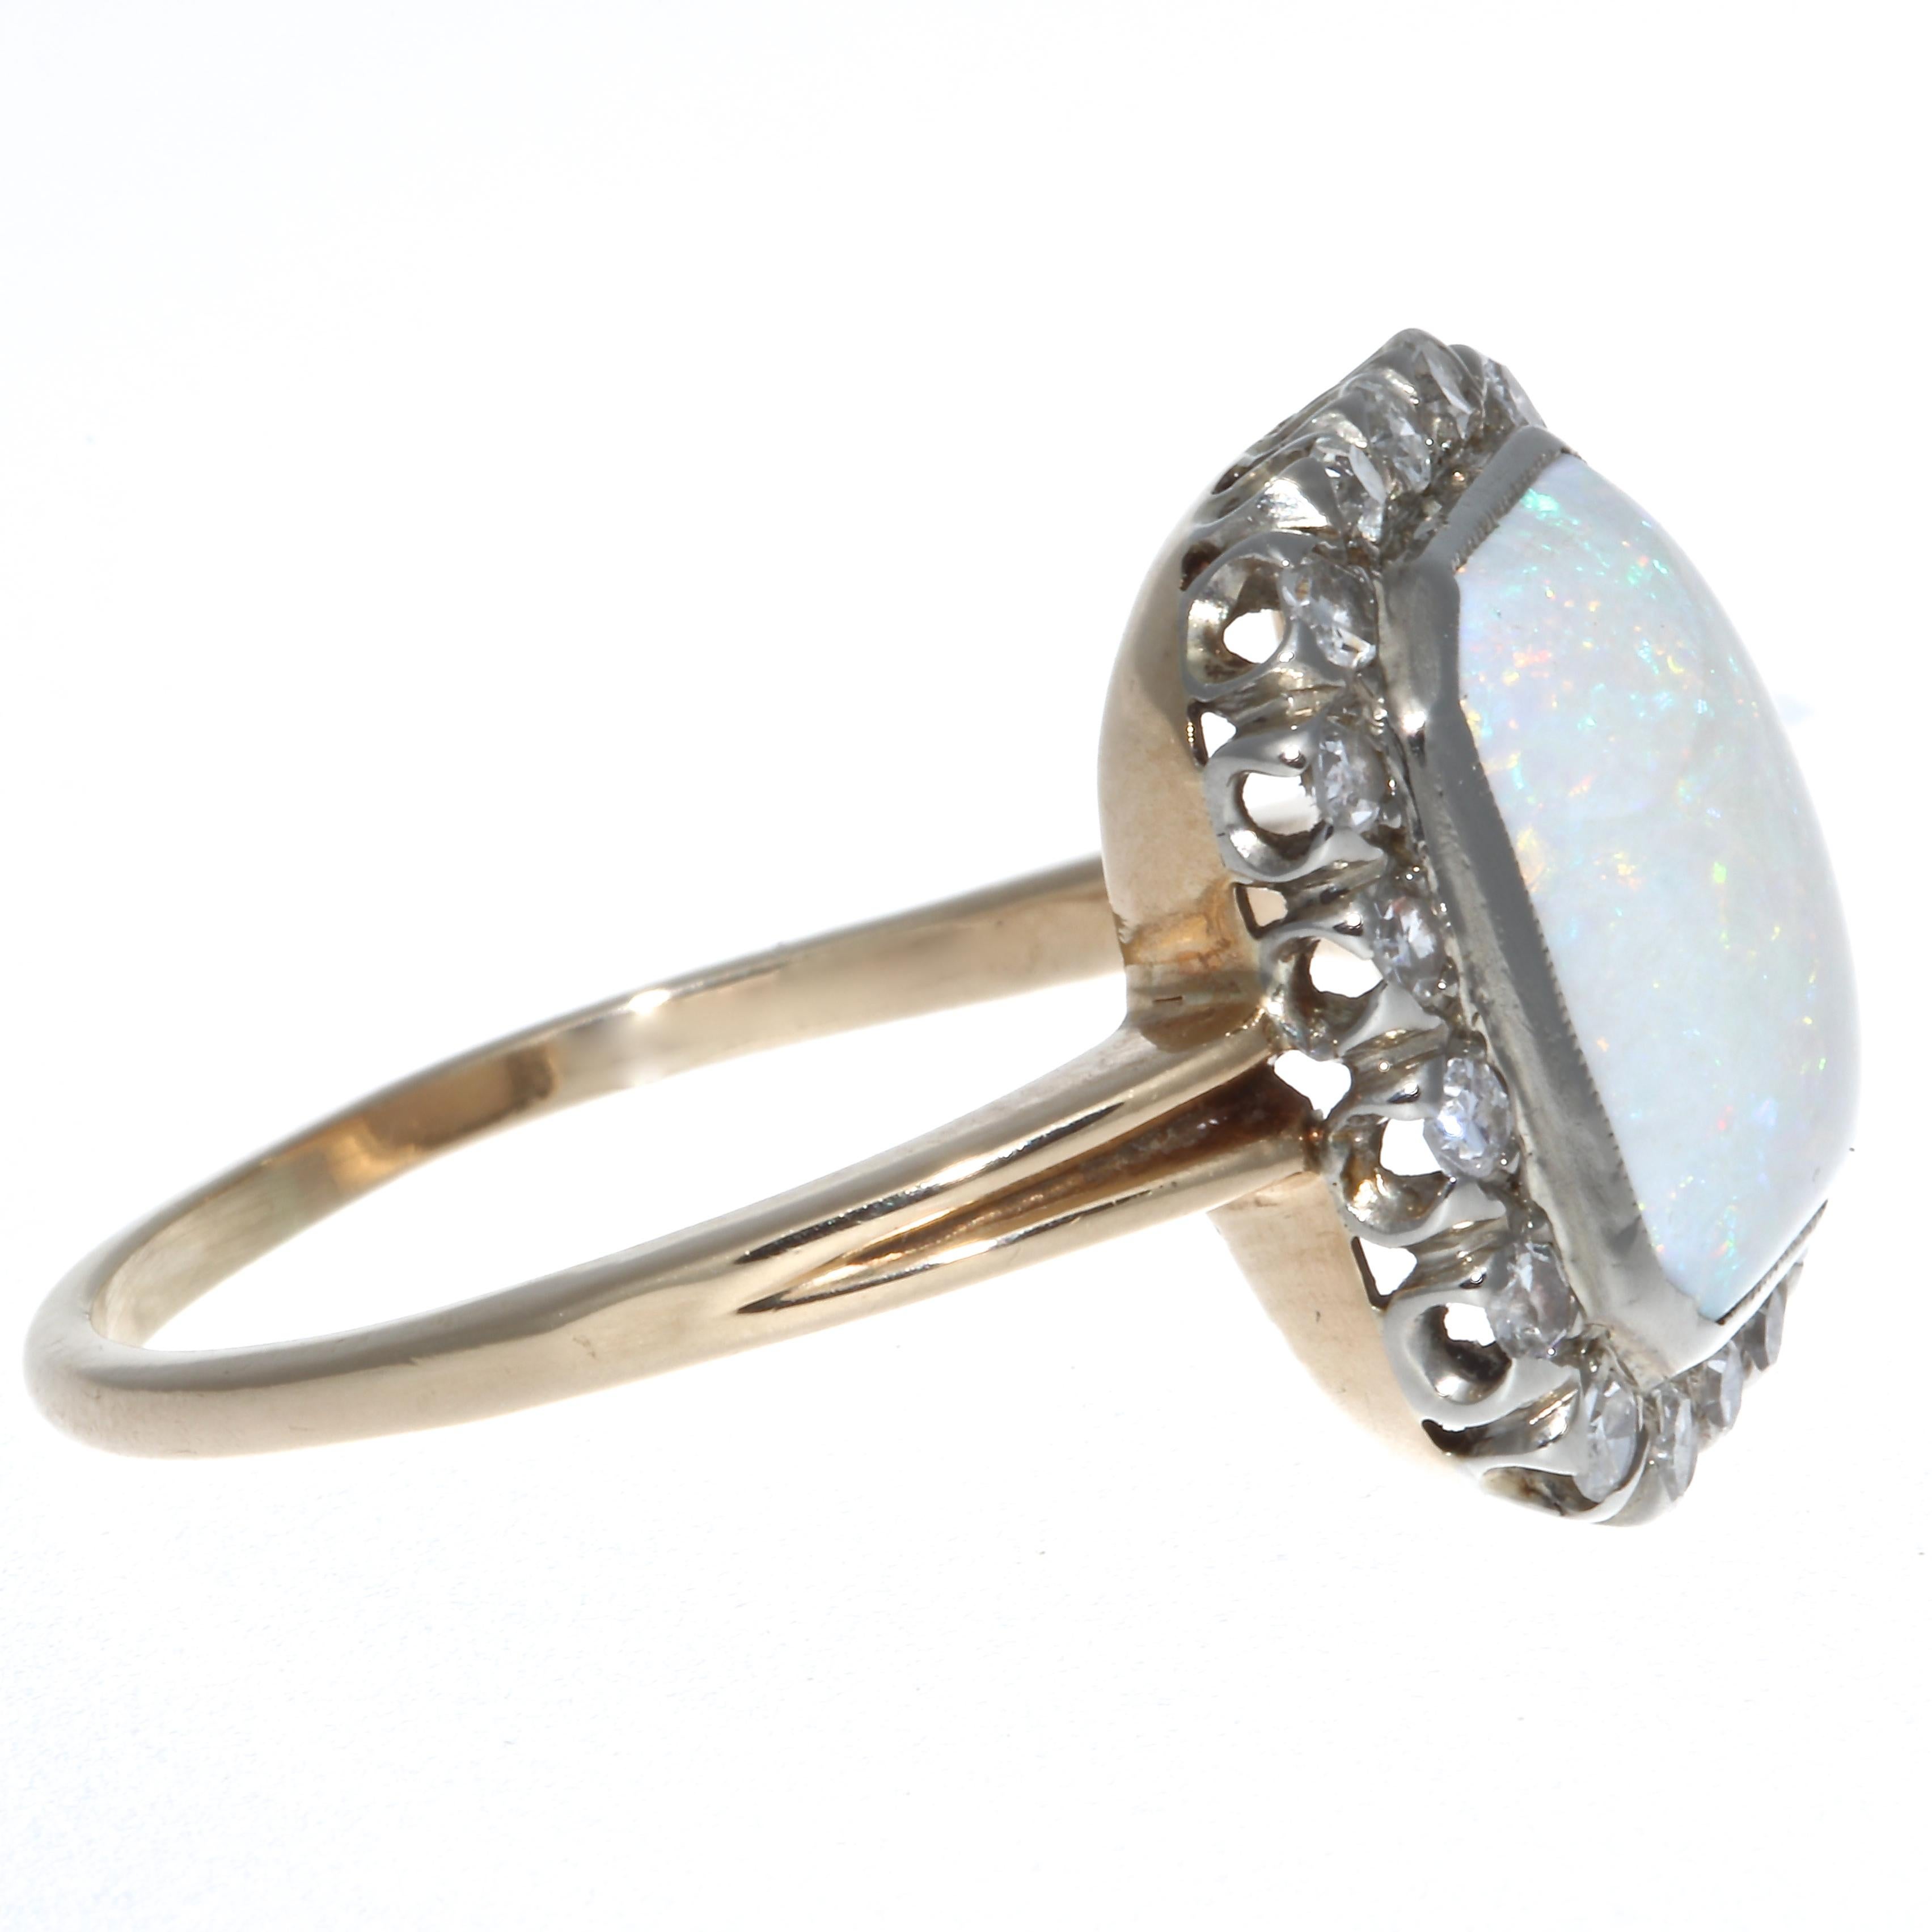 A rare antique Two-Tone opal ring. The beautifully shaped opal exhibits discreet colors throughout, maintaining it's regal presence while also exciting the eye. The opal is surrounded by 18 single cut diamonds, G,H color, SI clarity. The ring is 10k